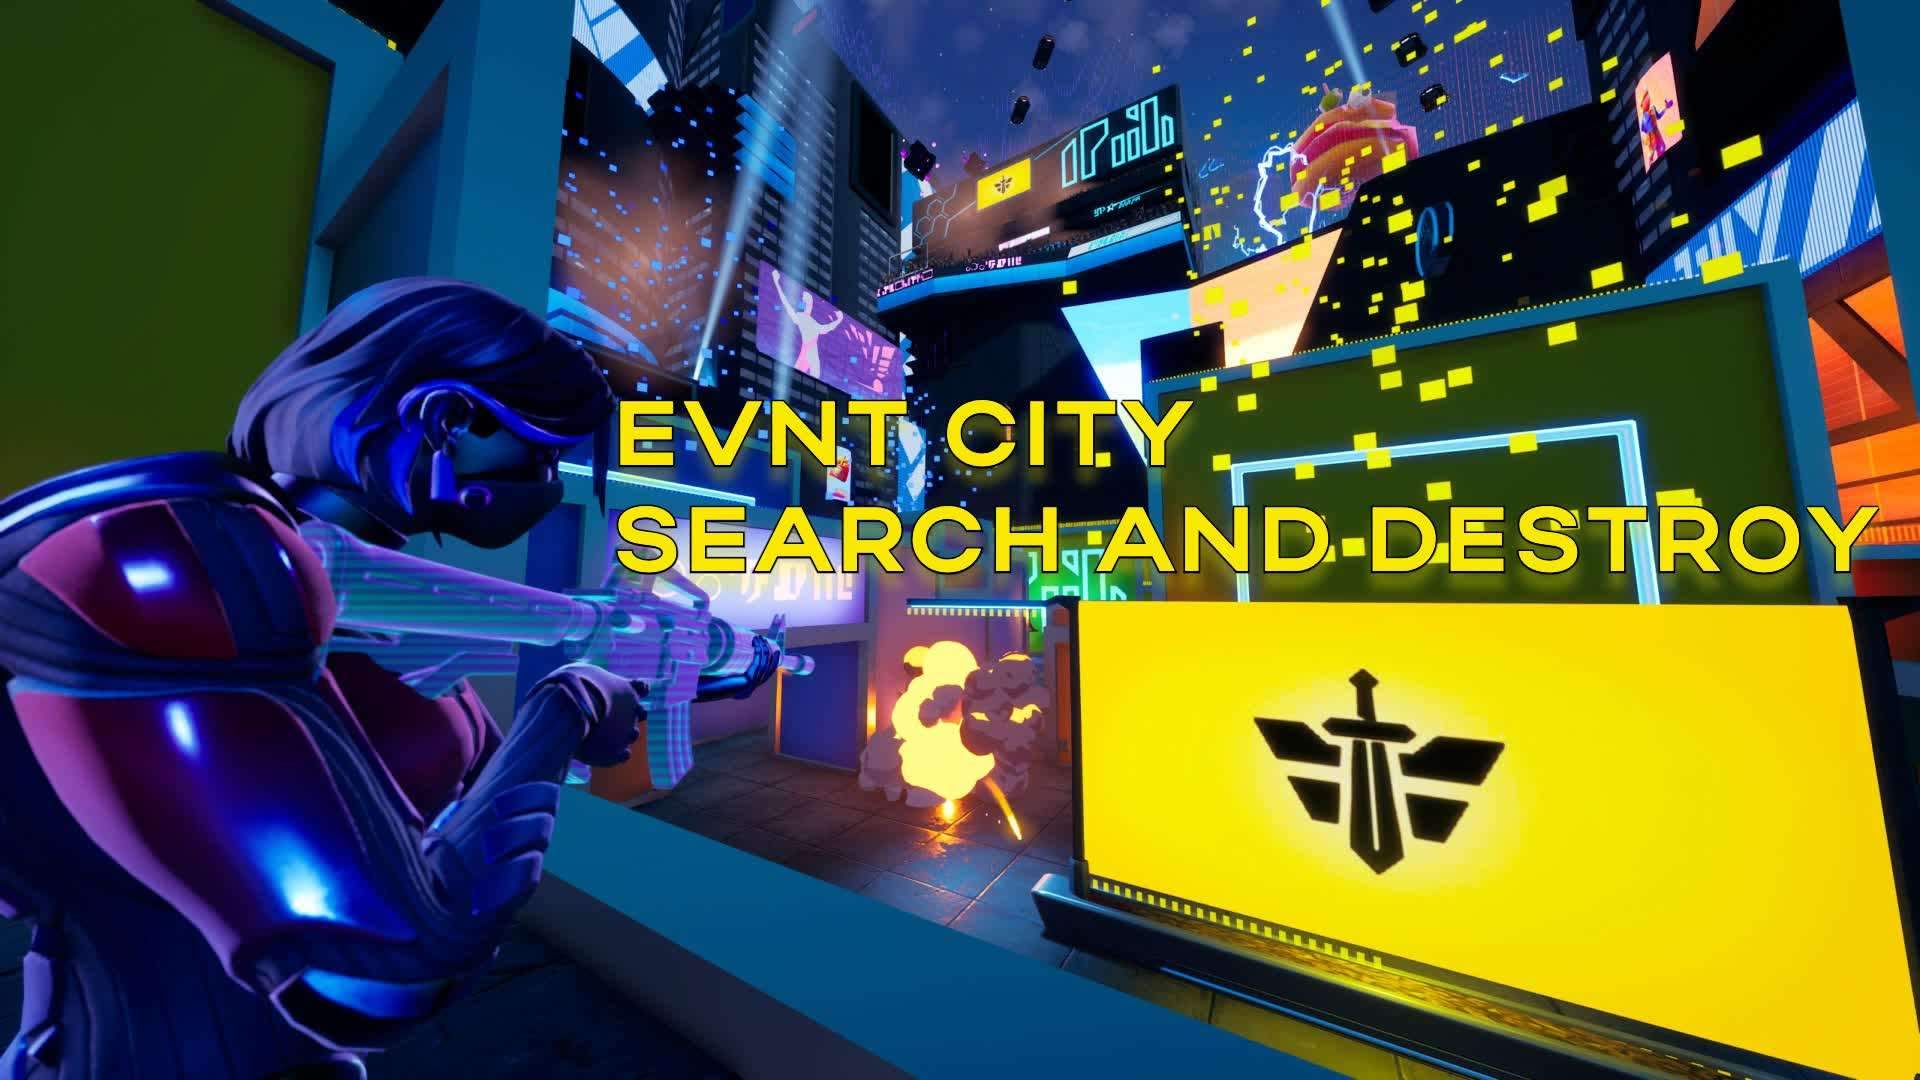 EVNT CITY | Search And Destroy